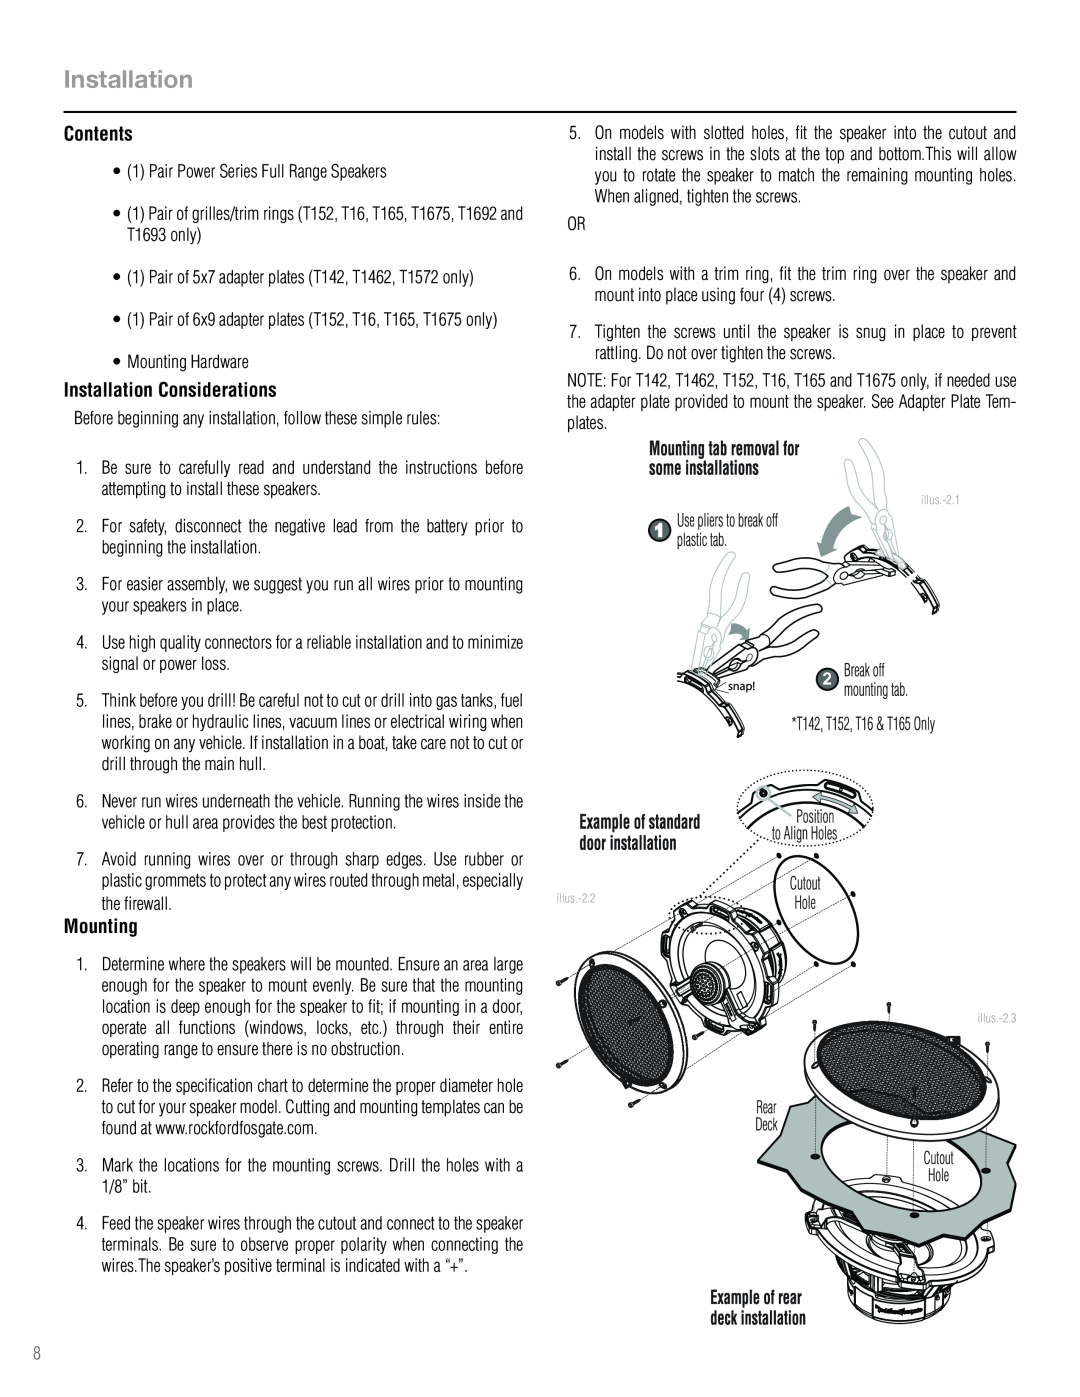 Rockford Fosgate T1693 manual Contents, Installation Considerations, Mounting 